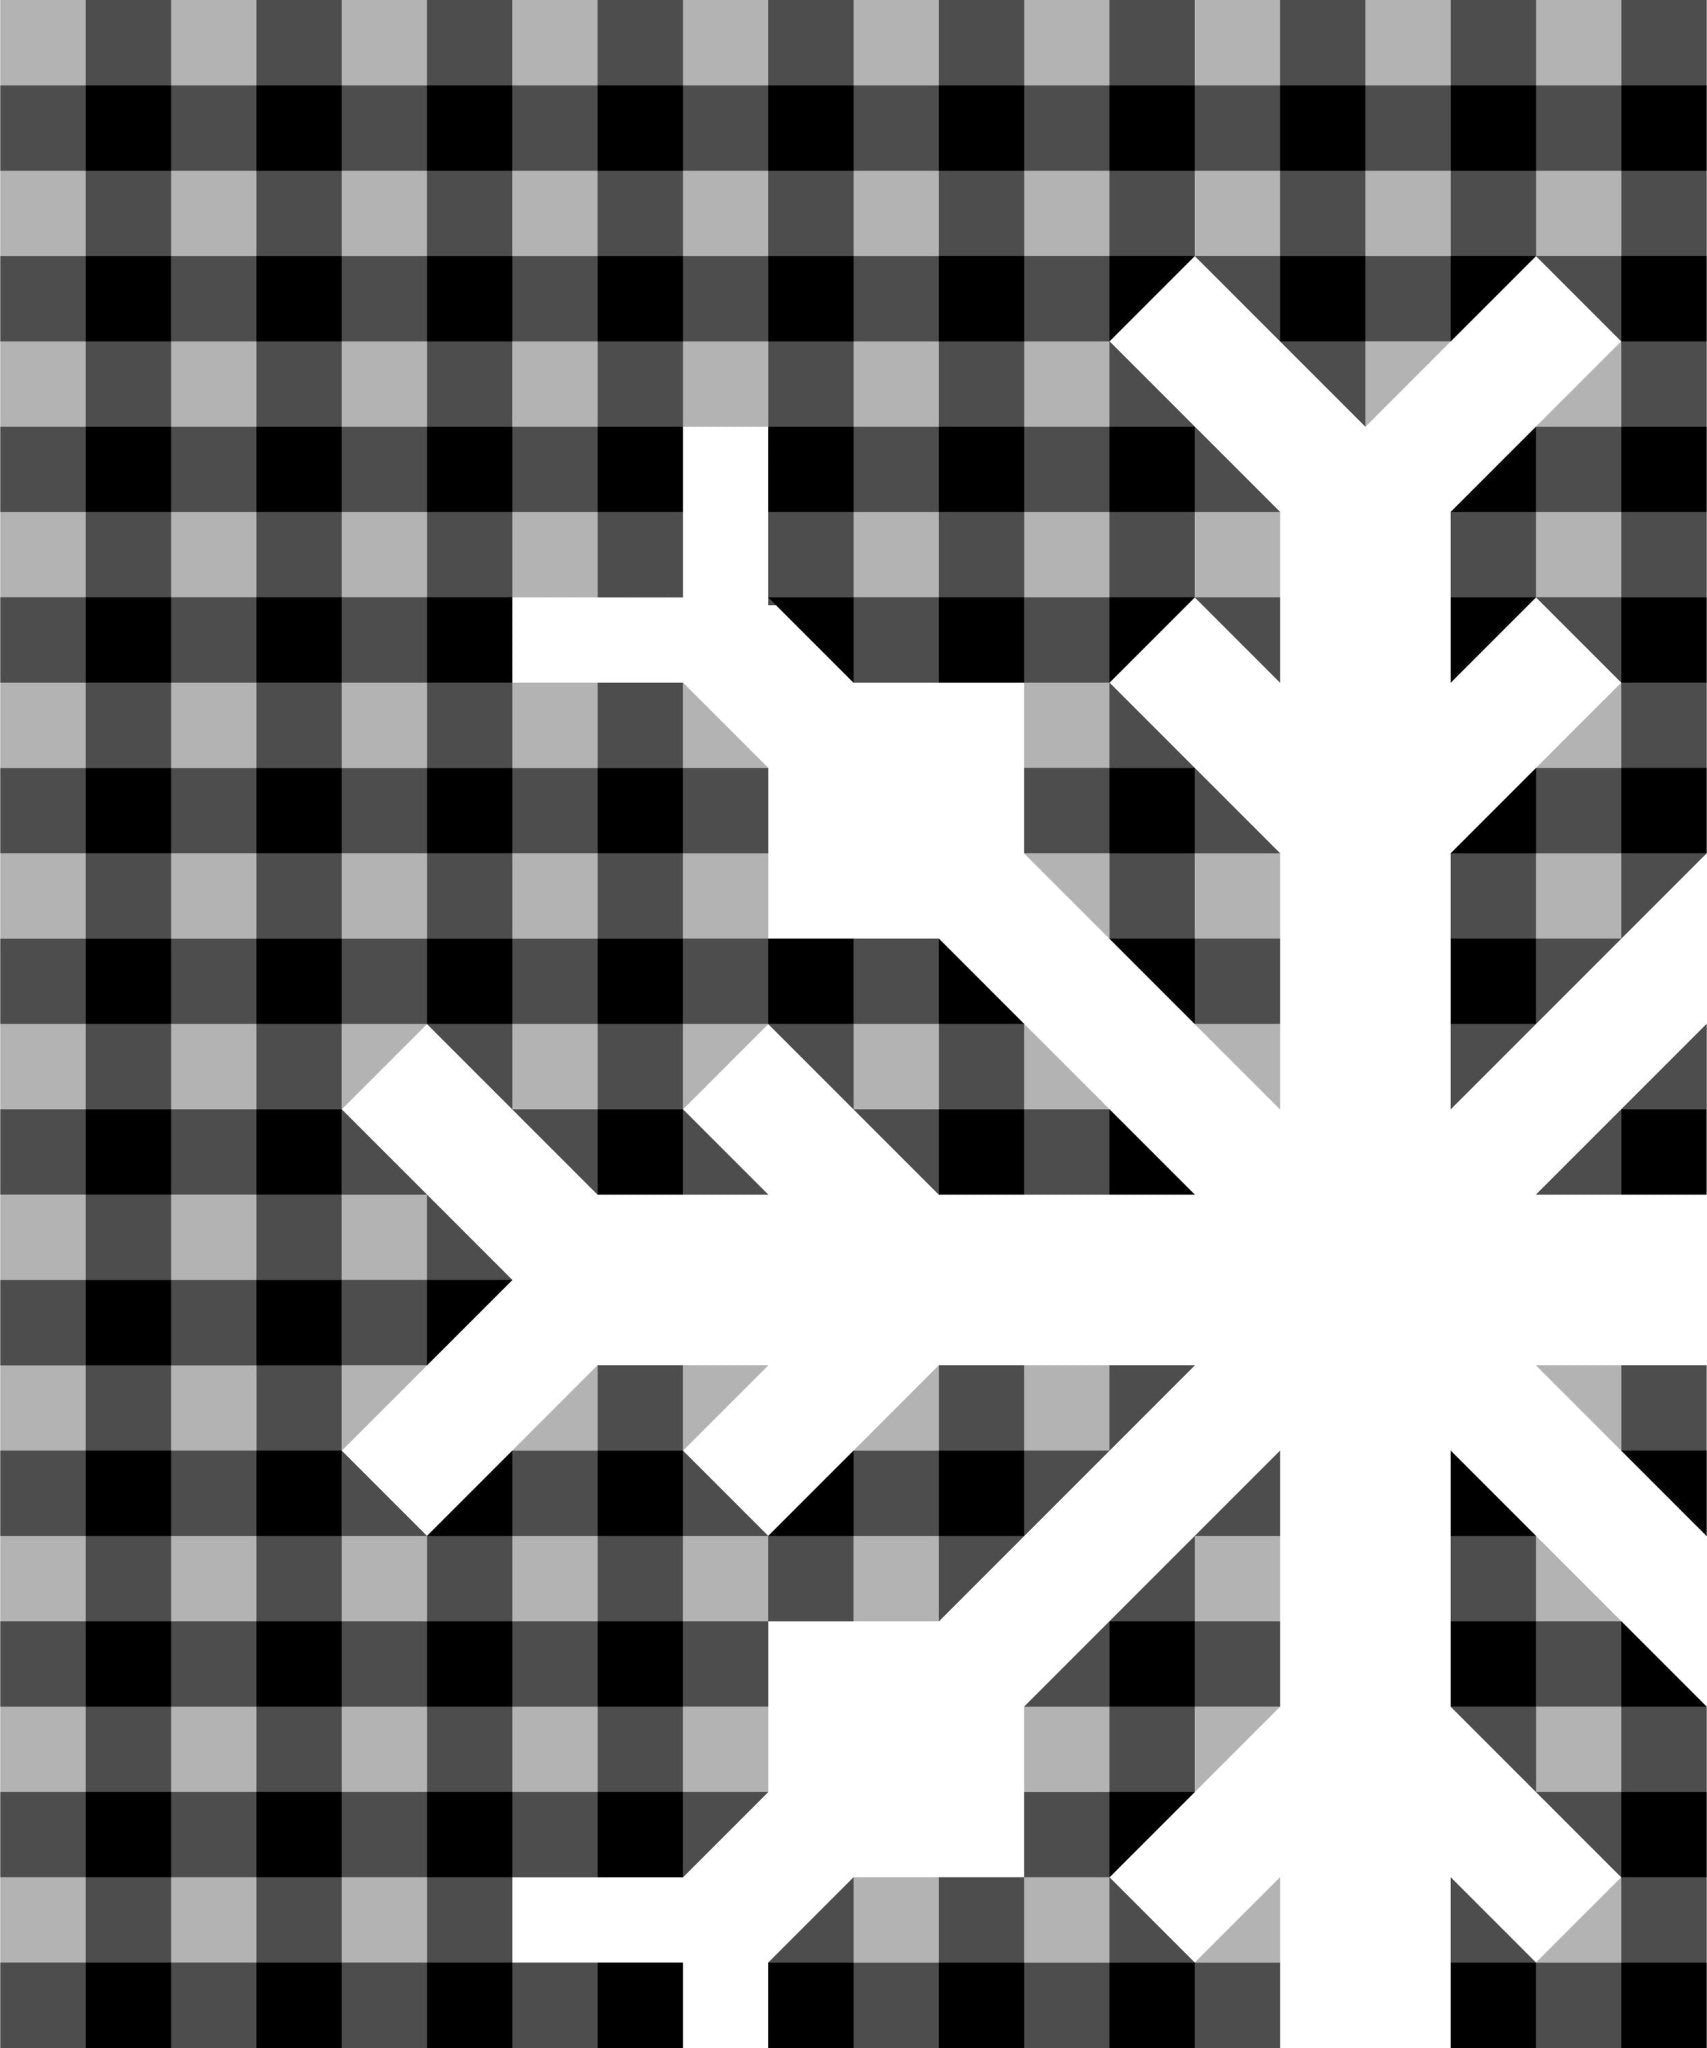 Snowflake Quilt - Buffalo Check Fabric Requirements | modernhandcraft